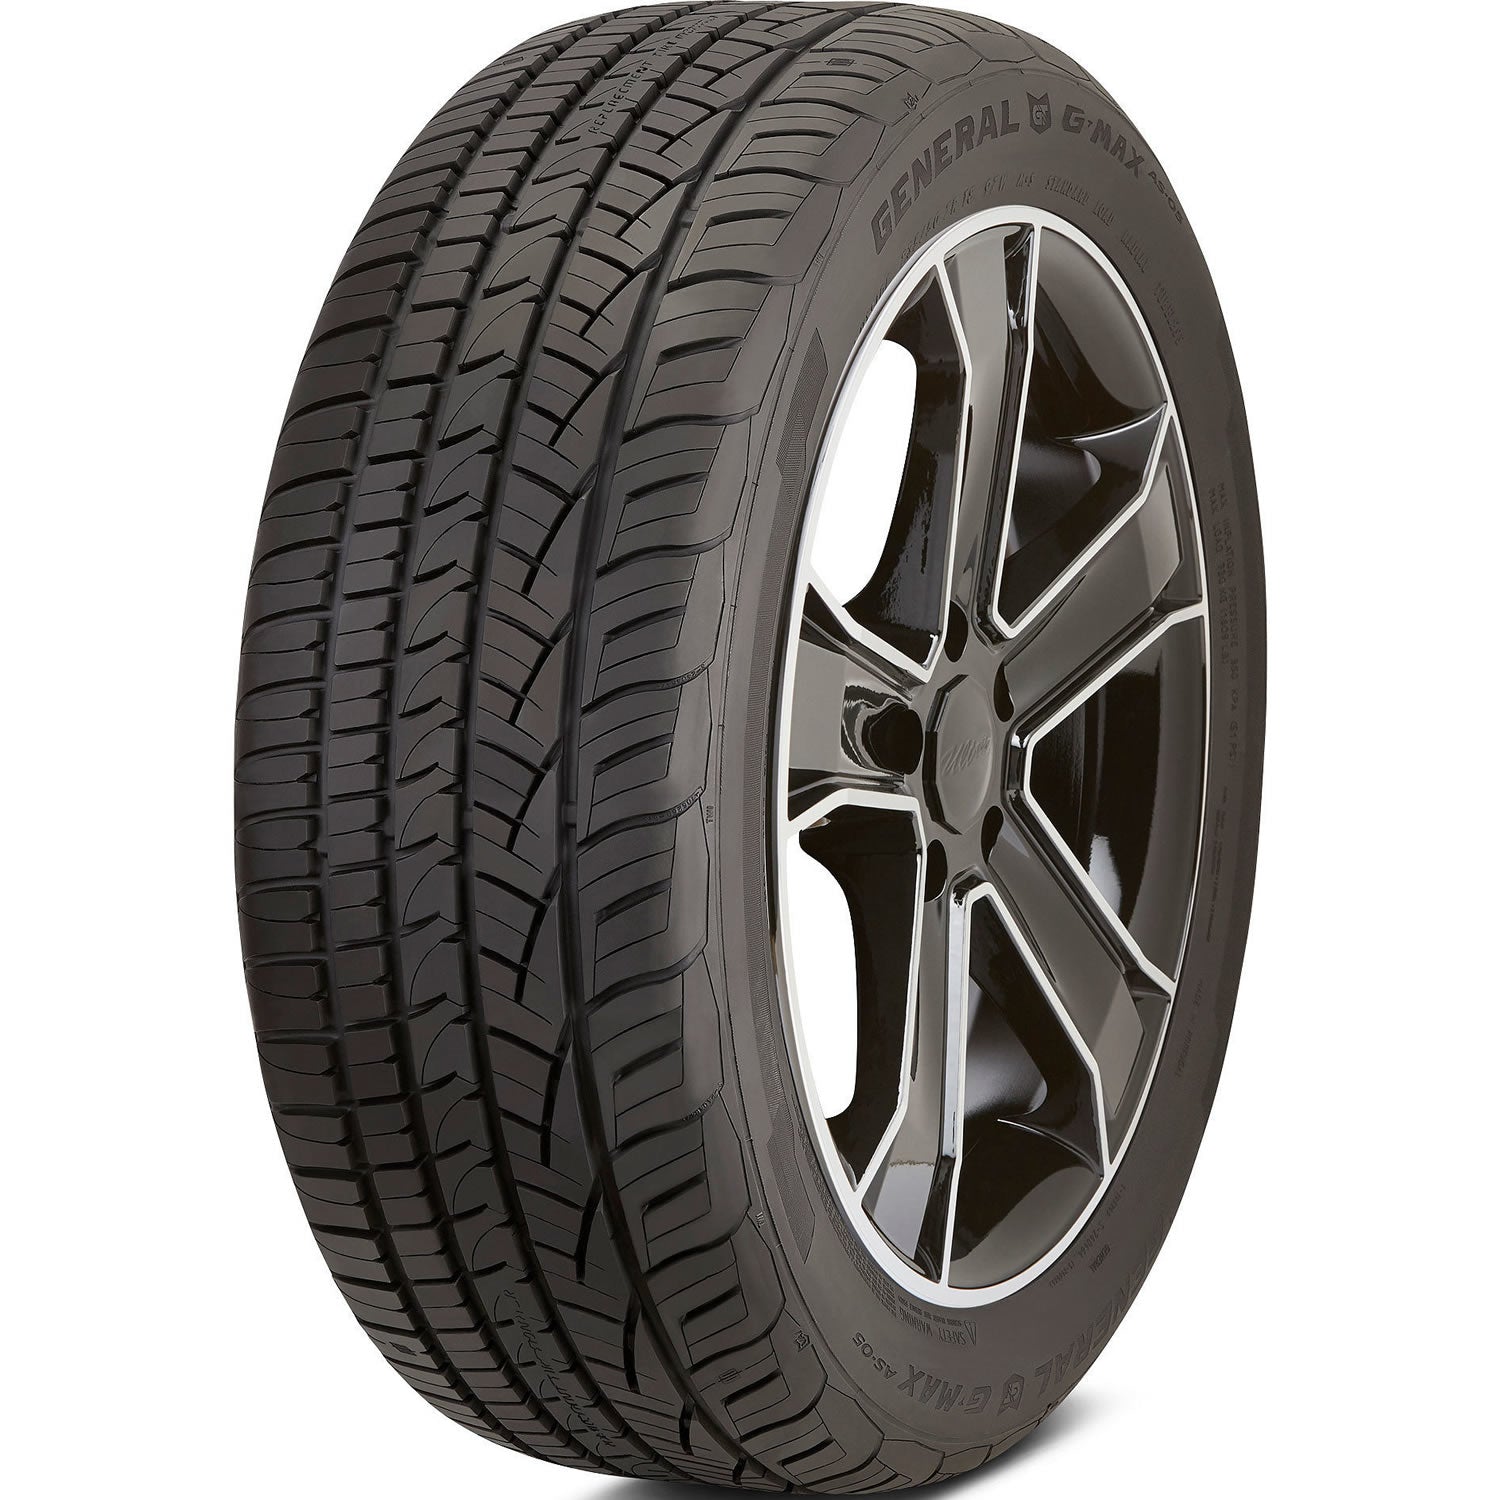 GENERAL G-MAX AS-05 205/50ZR16 (24.1X8.1R 16) Tires